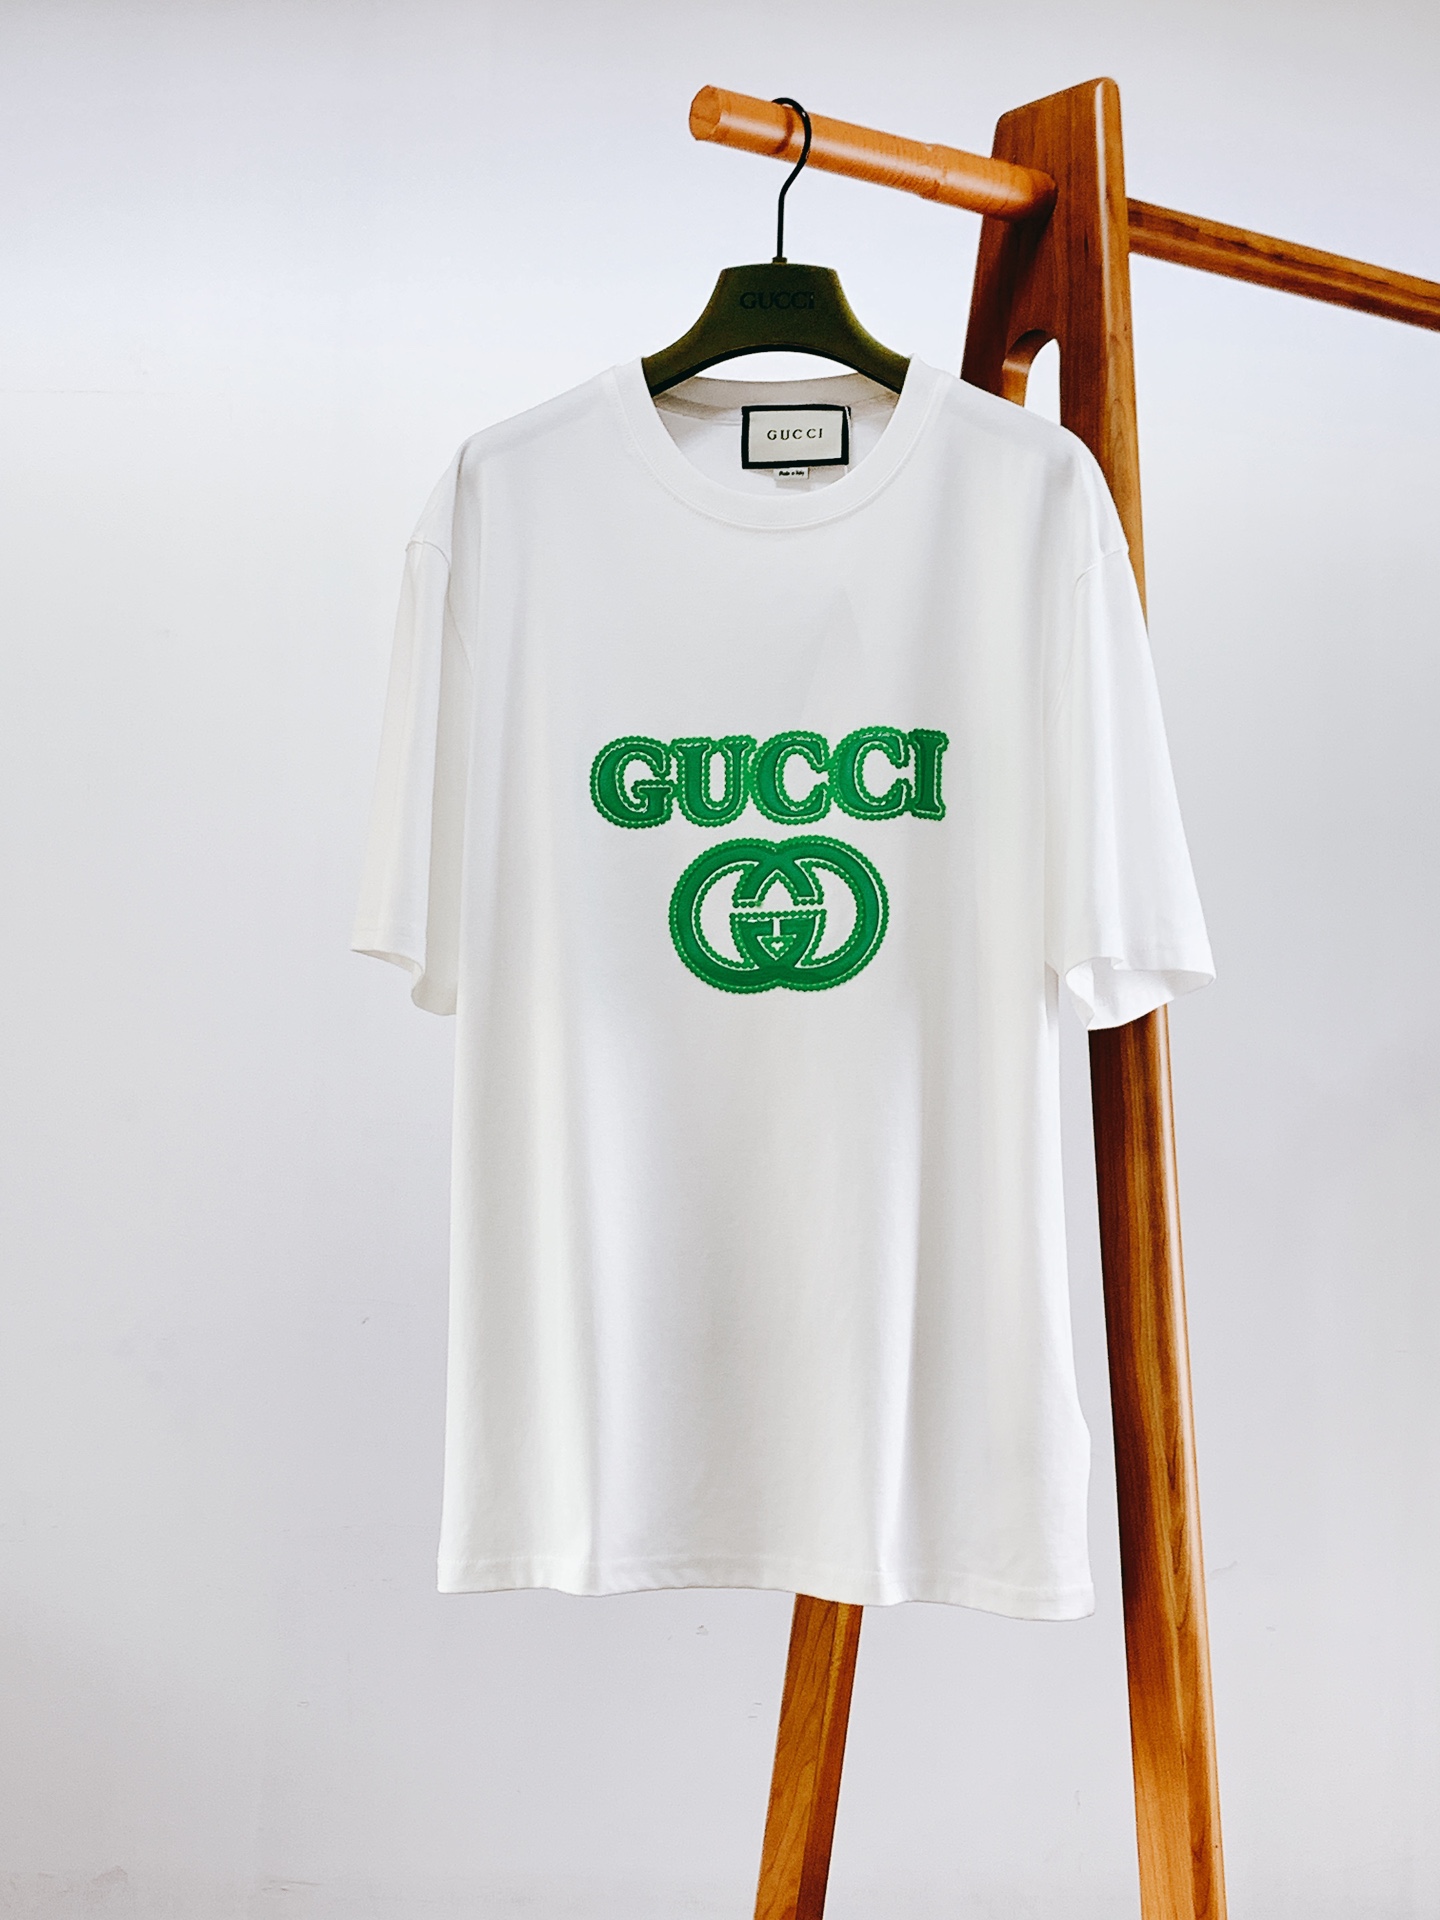 Gucci Clothing T-Shirt Embroidery Unisex Cotton Knitted Knitting Silica Gel Spring/Summer Collection Short Sleeve